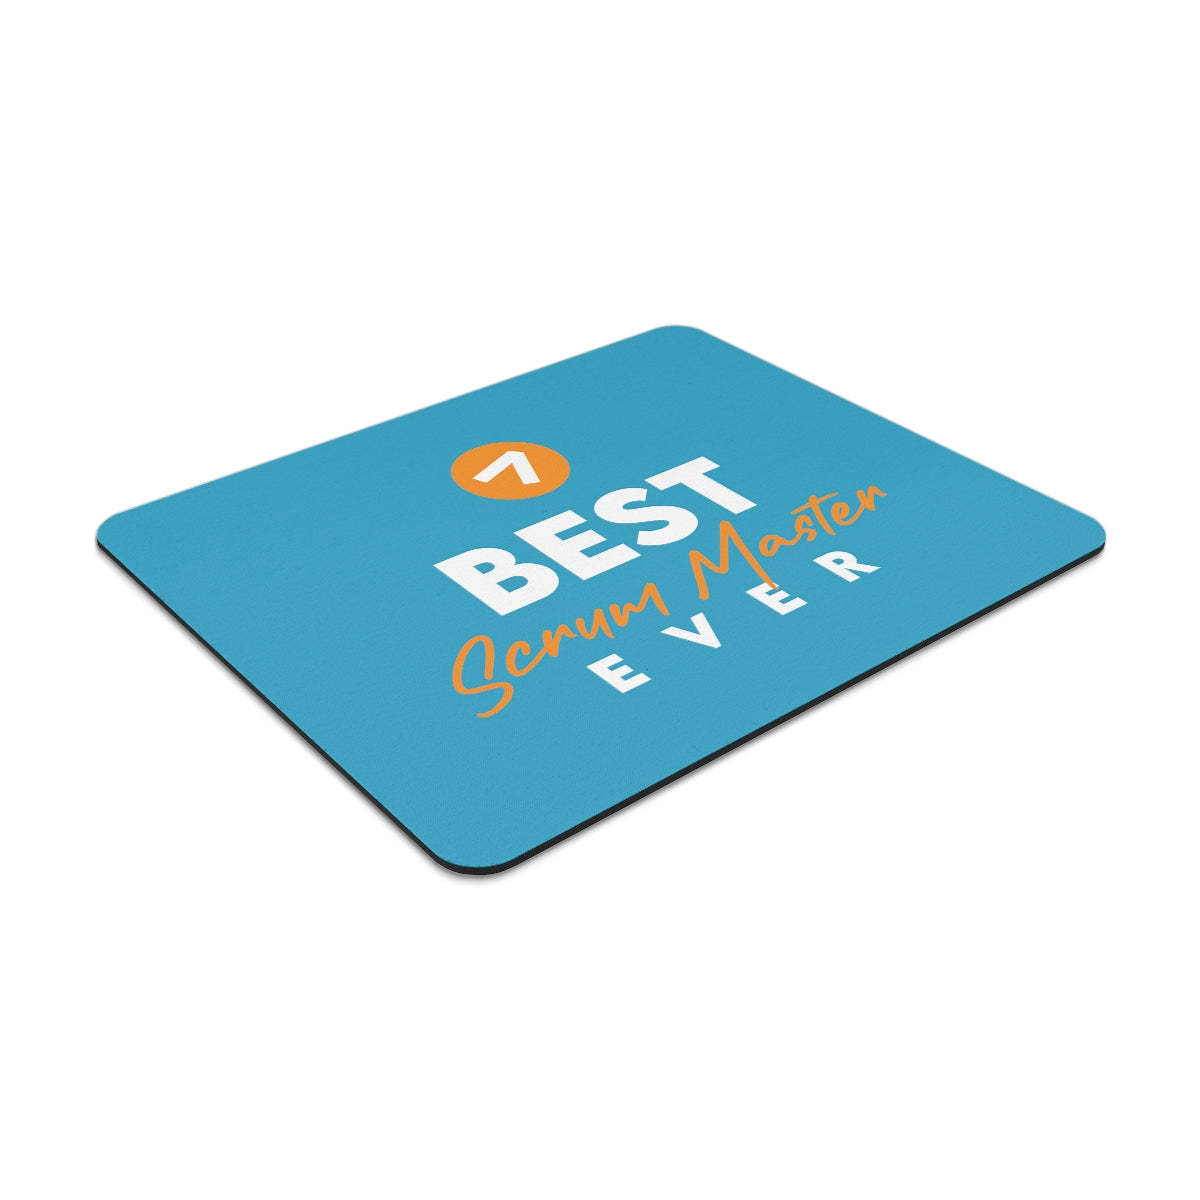 \Best Scrum Master ever - Orange Blue - Mouse Pad (3mm Thick)